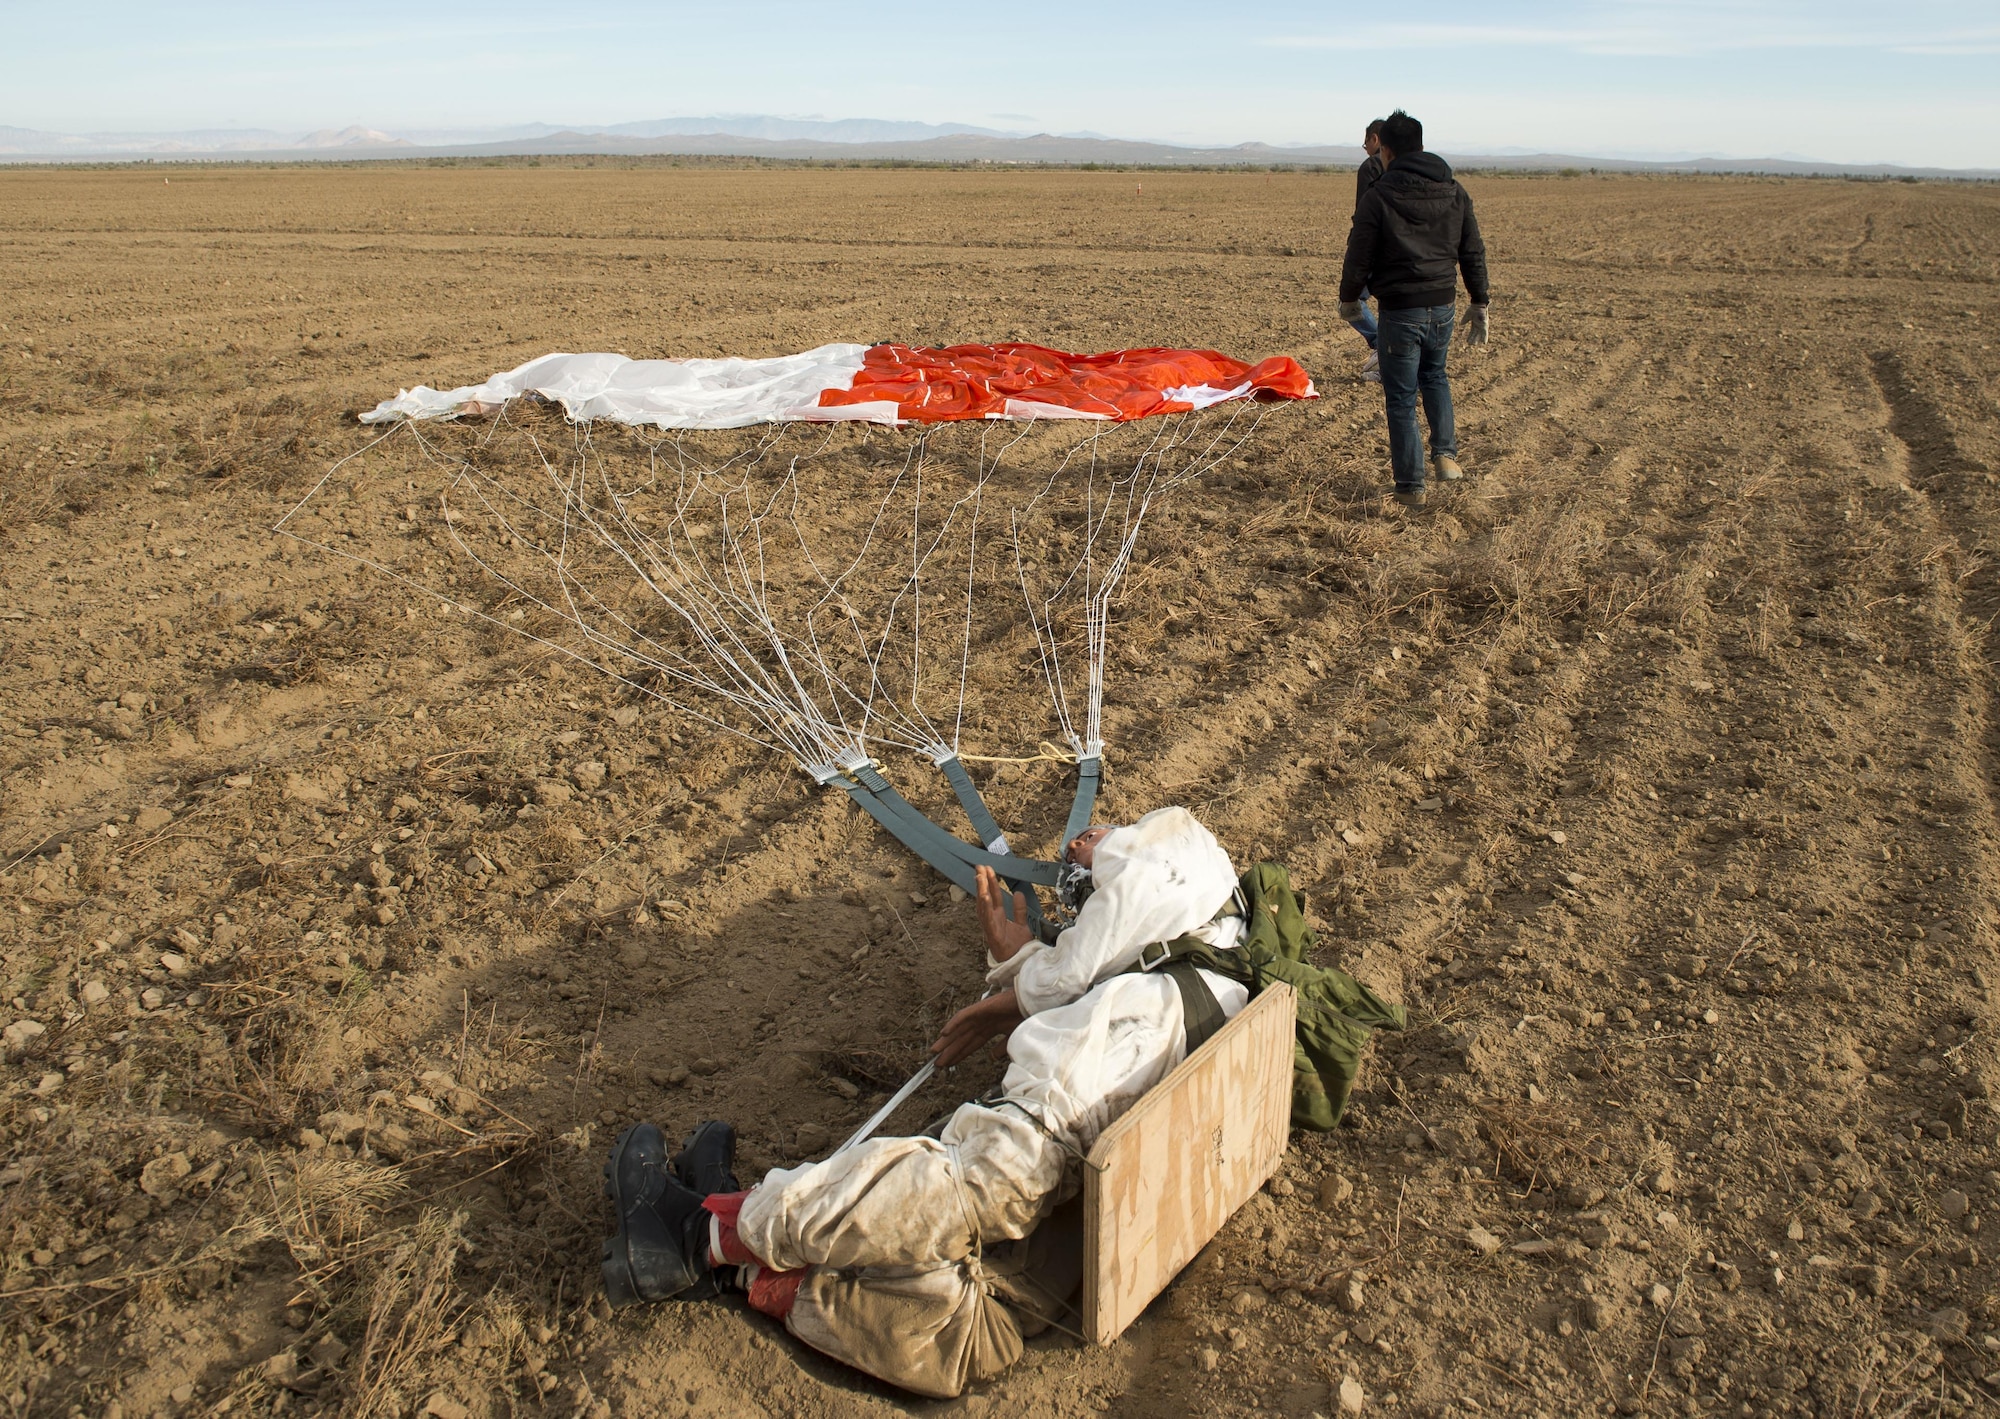 A dummy attached to a GR7000 parachute is recovered following a test drop at the ROWE drop zone south of Edwards Air Force Base. Members of the 418th Flight Test Squadron are testing a new parachute canopy for the Advanced Concept Ejection Seat II, or ACES II. (U.S. Air Force photo by Ethan Wagner)